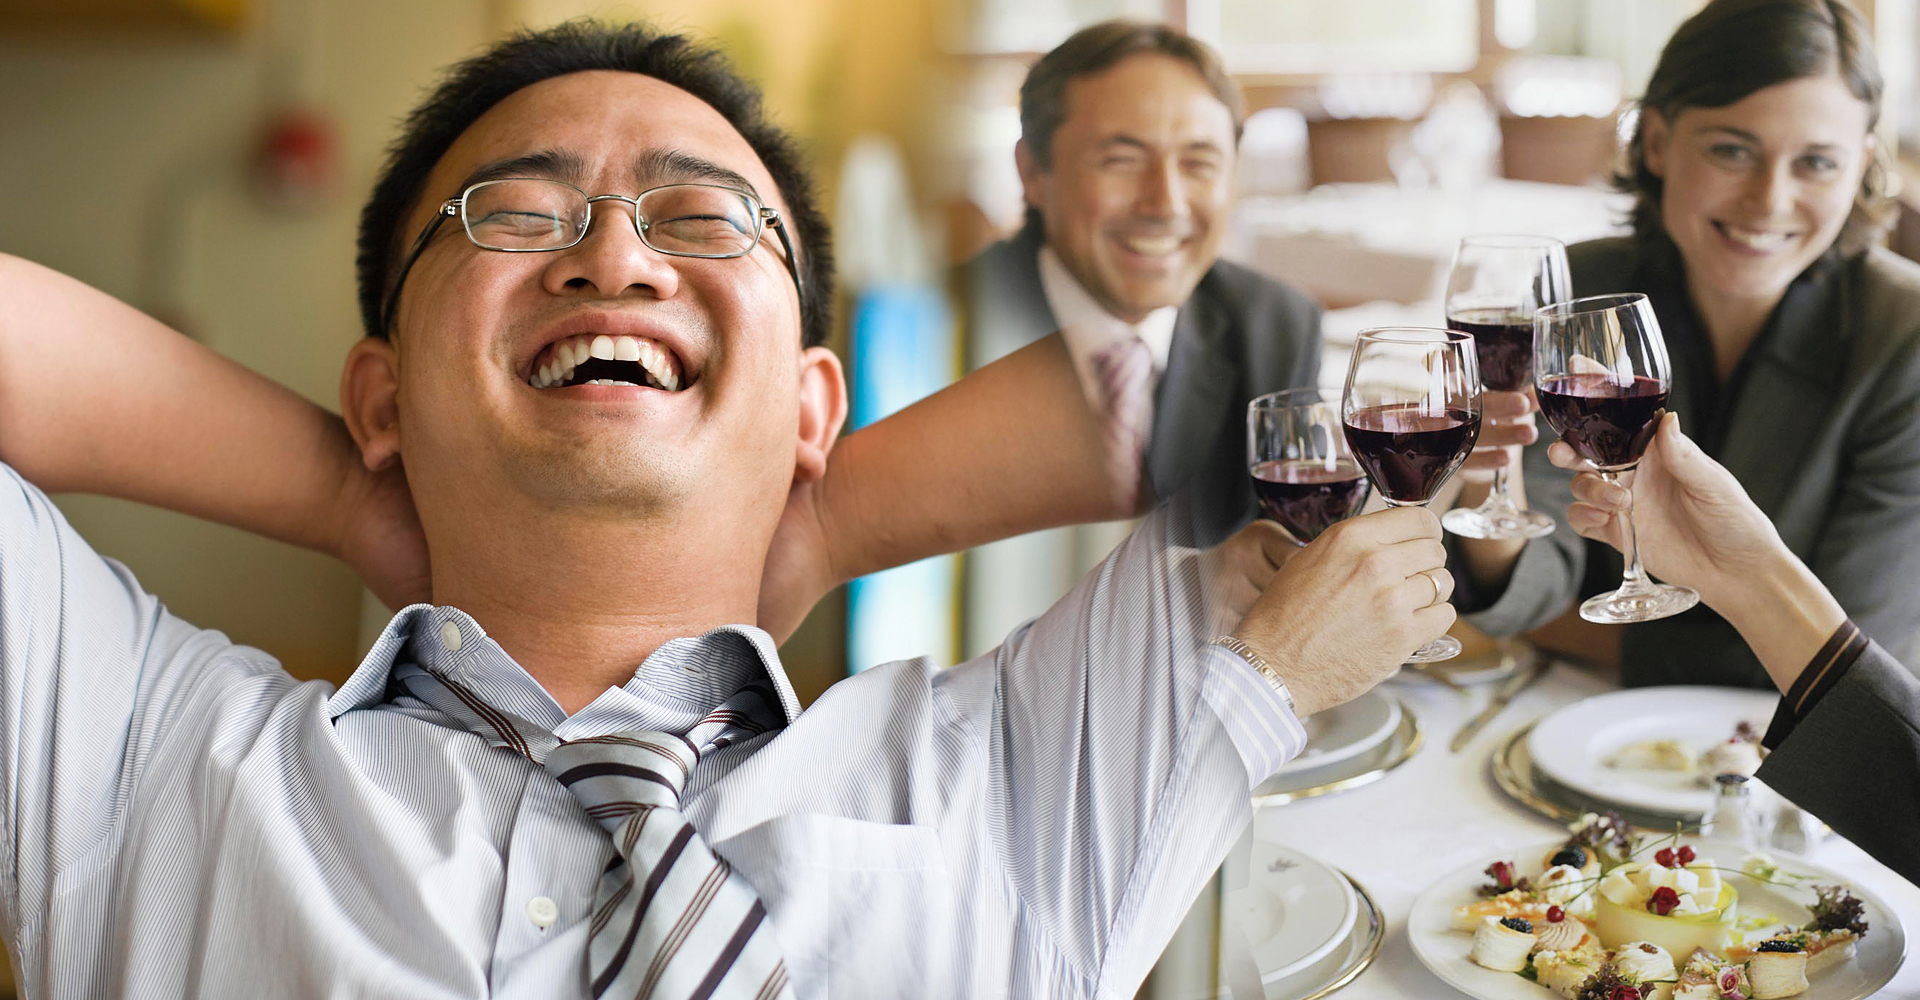 asian business man laughing happy sitting PLUS business people at table toasting wine glasses